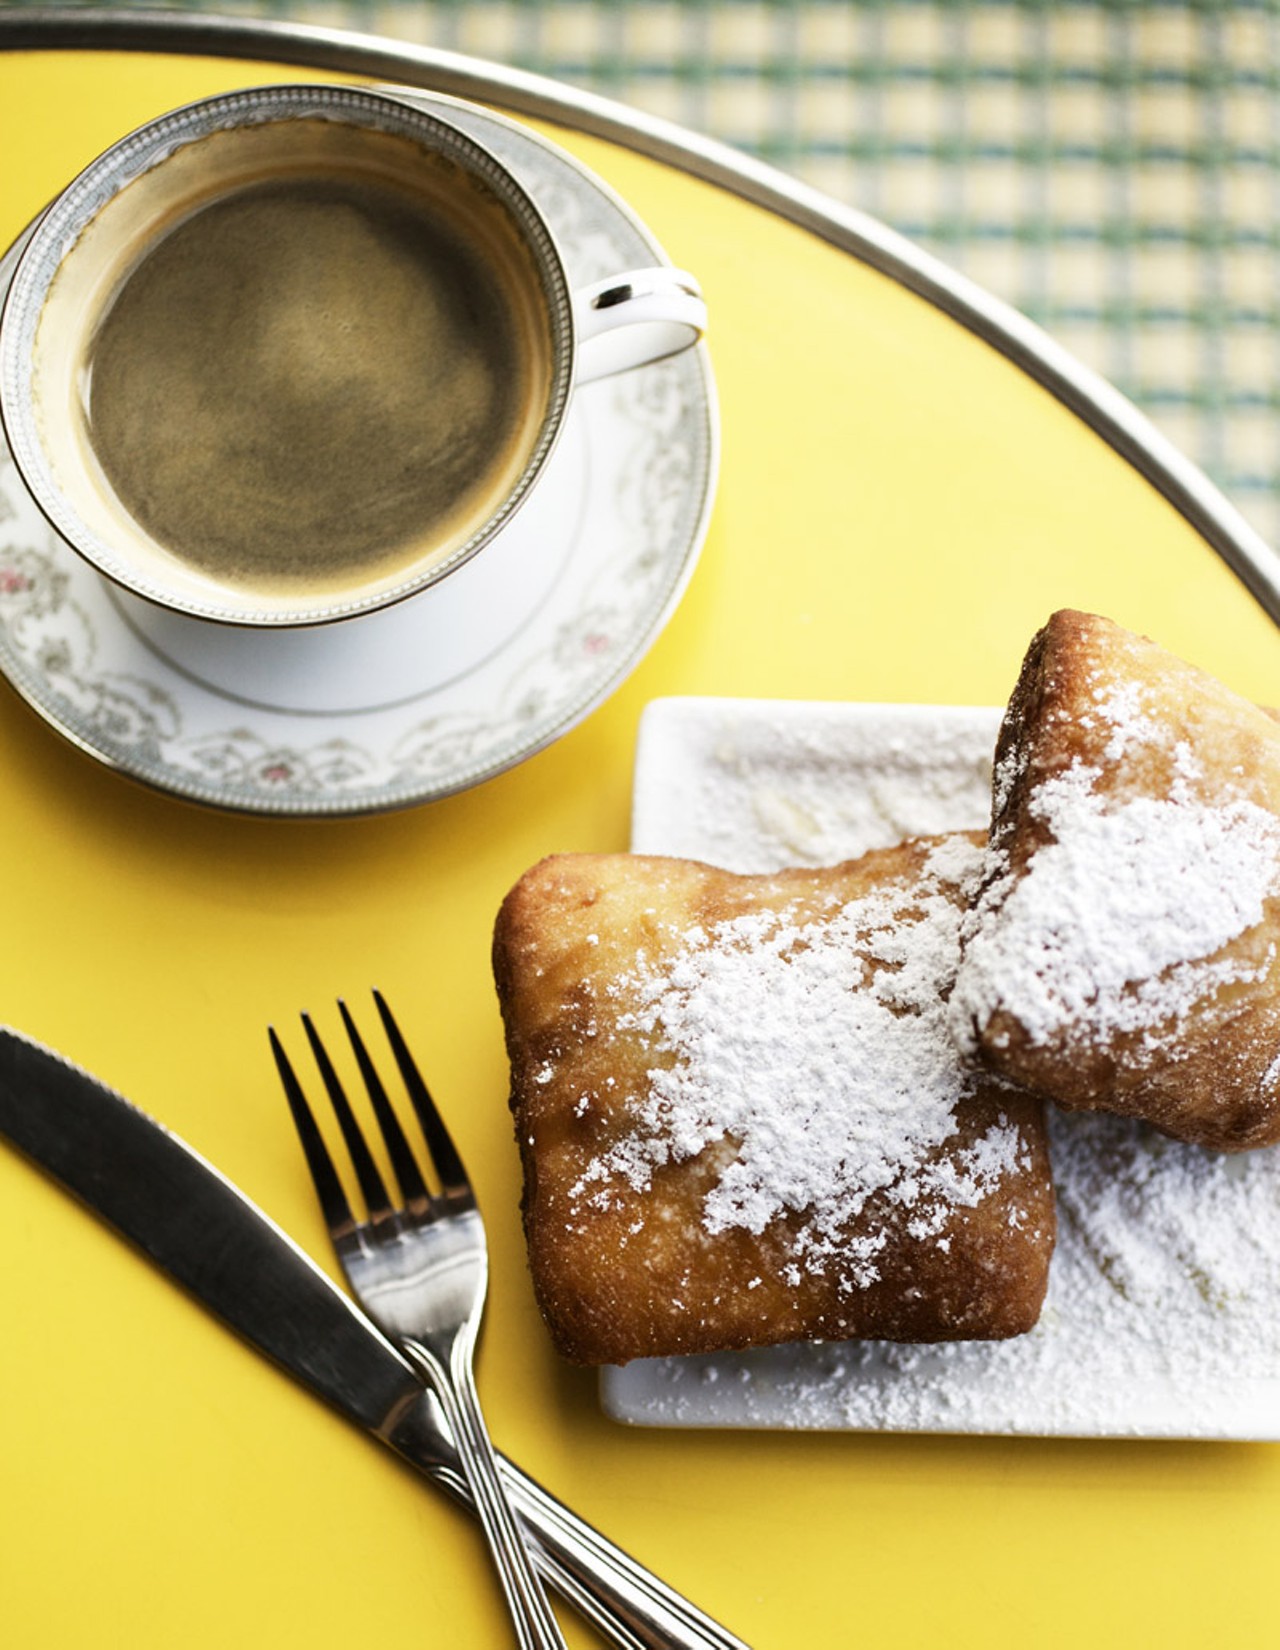 Beignets and coffee.